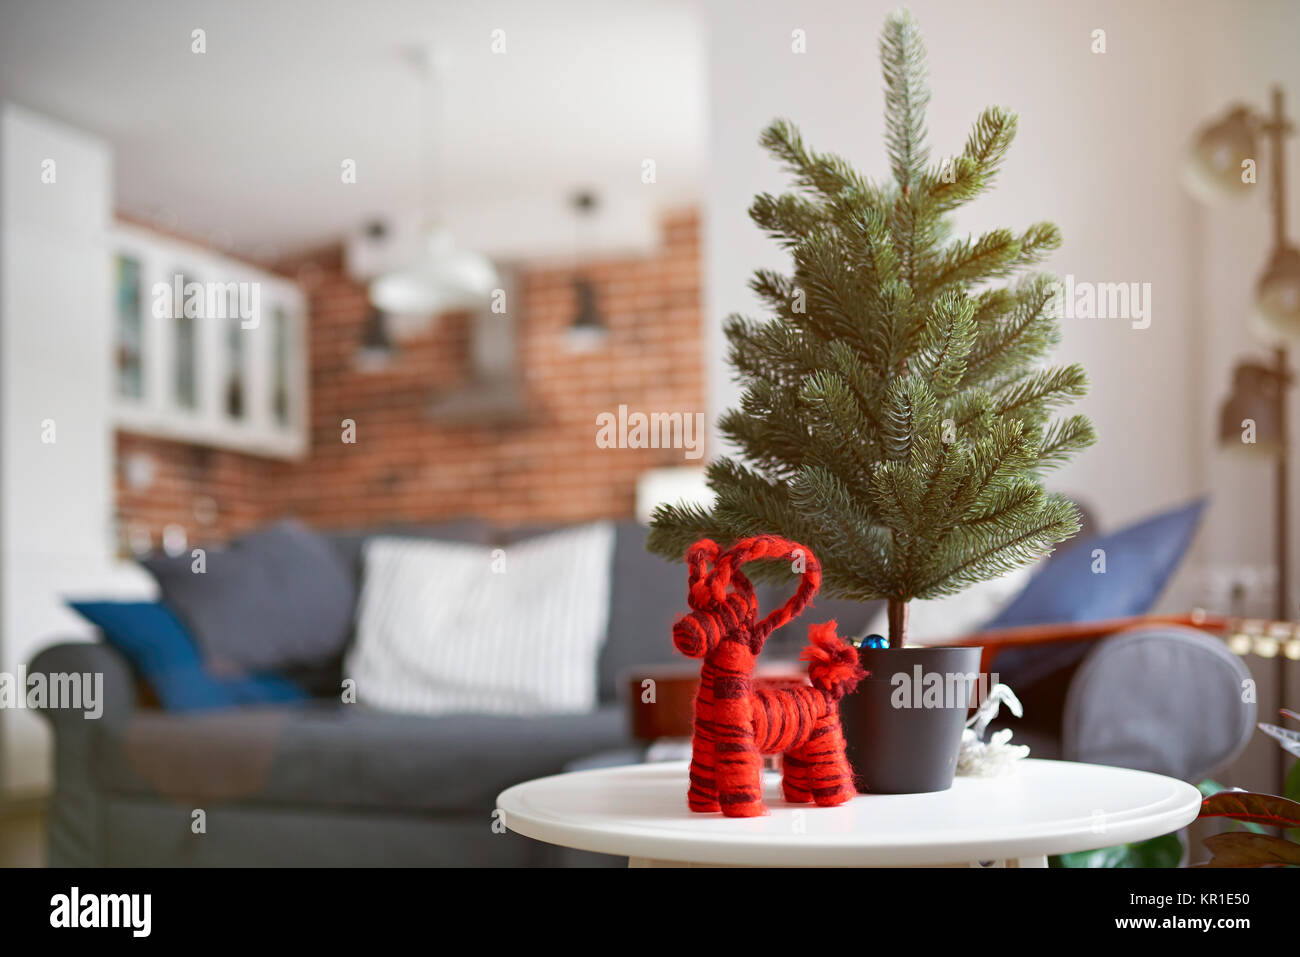 Red christmas toy with pine tree on modern apartments interior Stock Photo